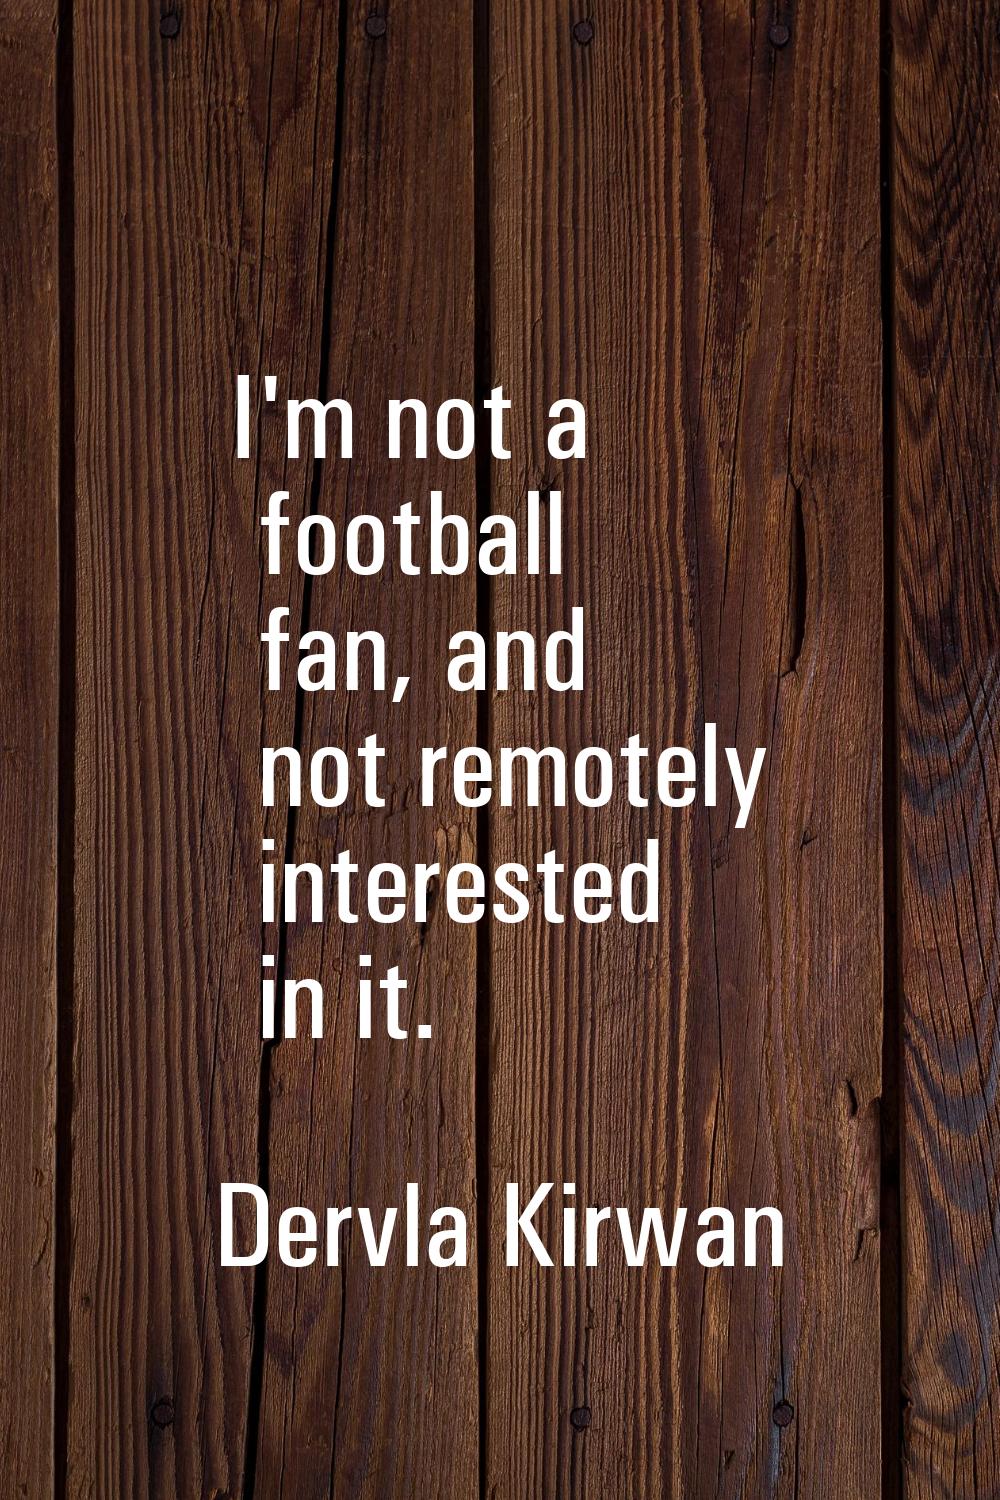 I'm not a football fan, and not remotely interested in it.